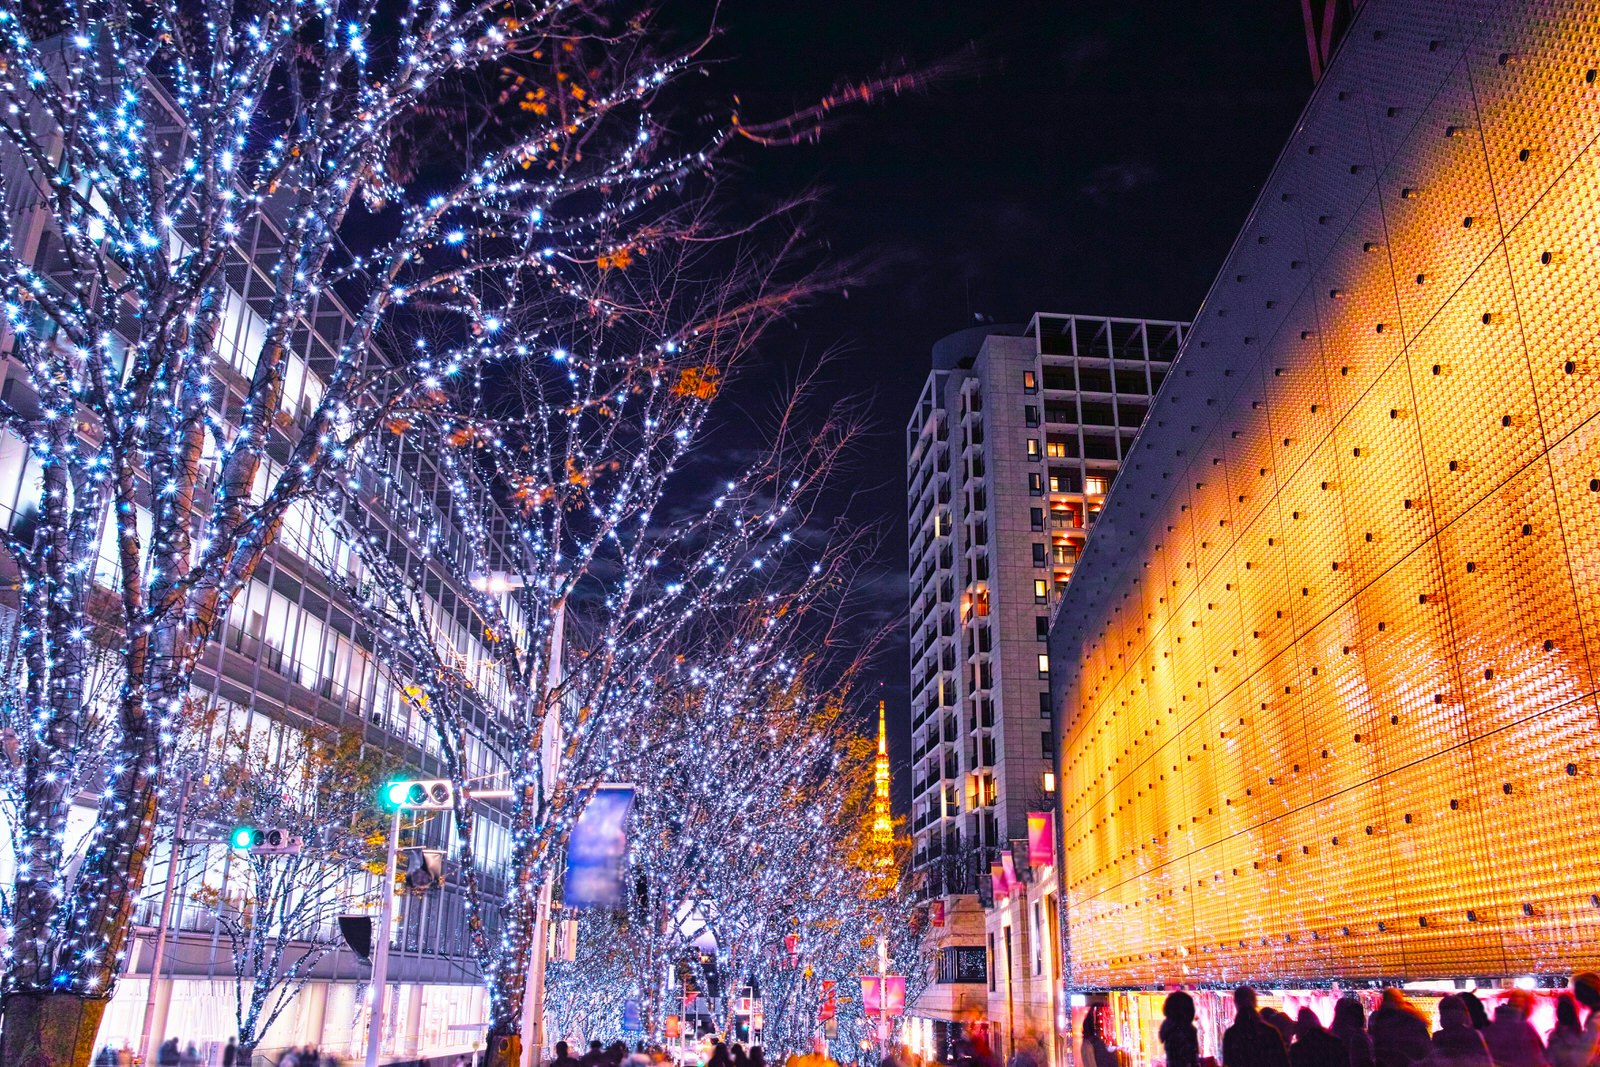 Blue and white lights cover a row of trees lighting up a street in Roppongi